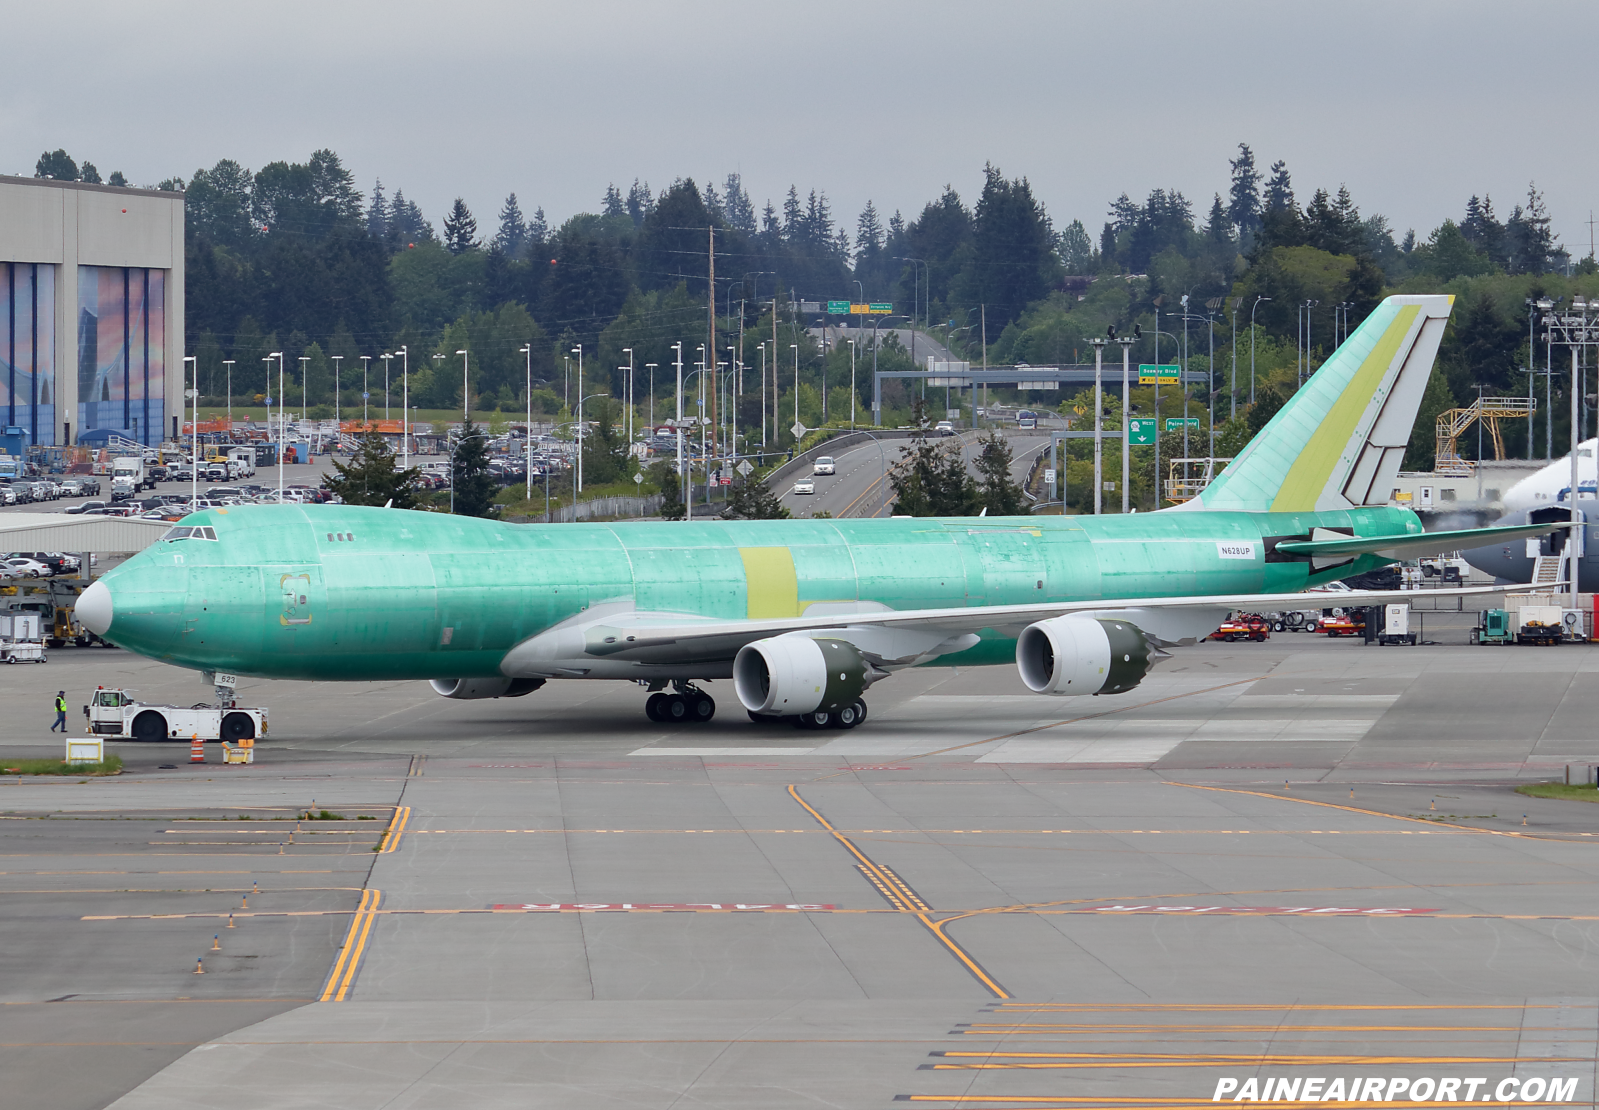 UPS 747-8F N628UP at KPAE Paine Field